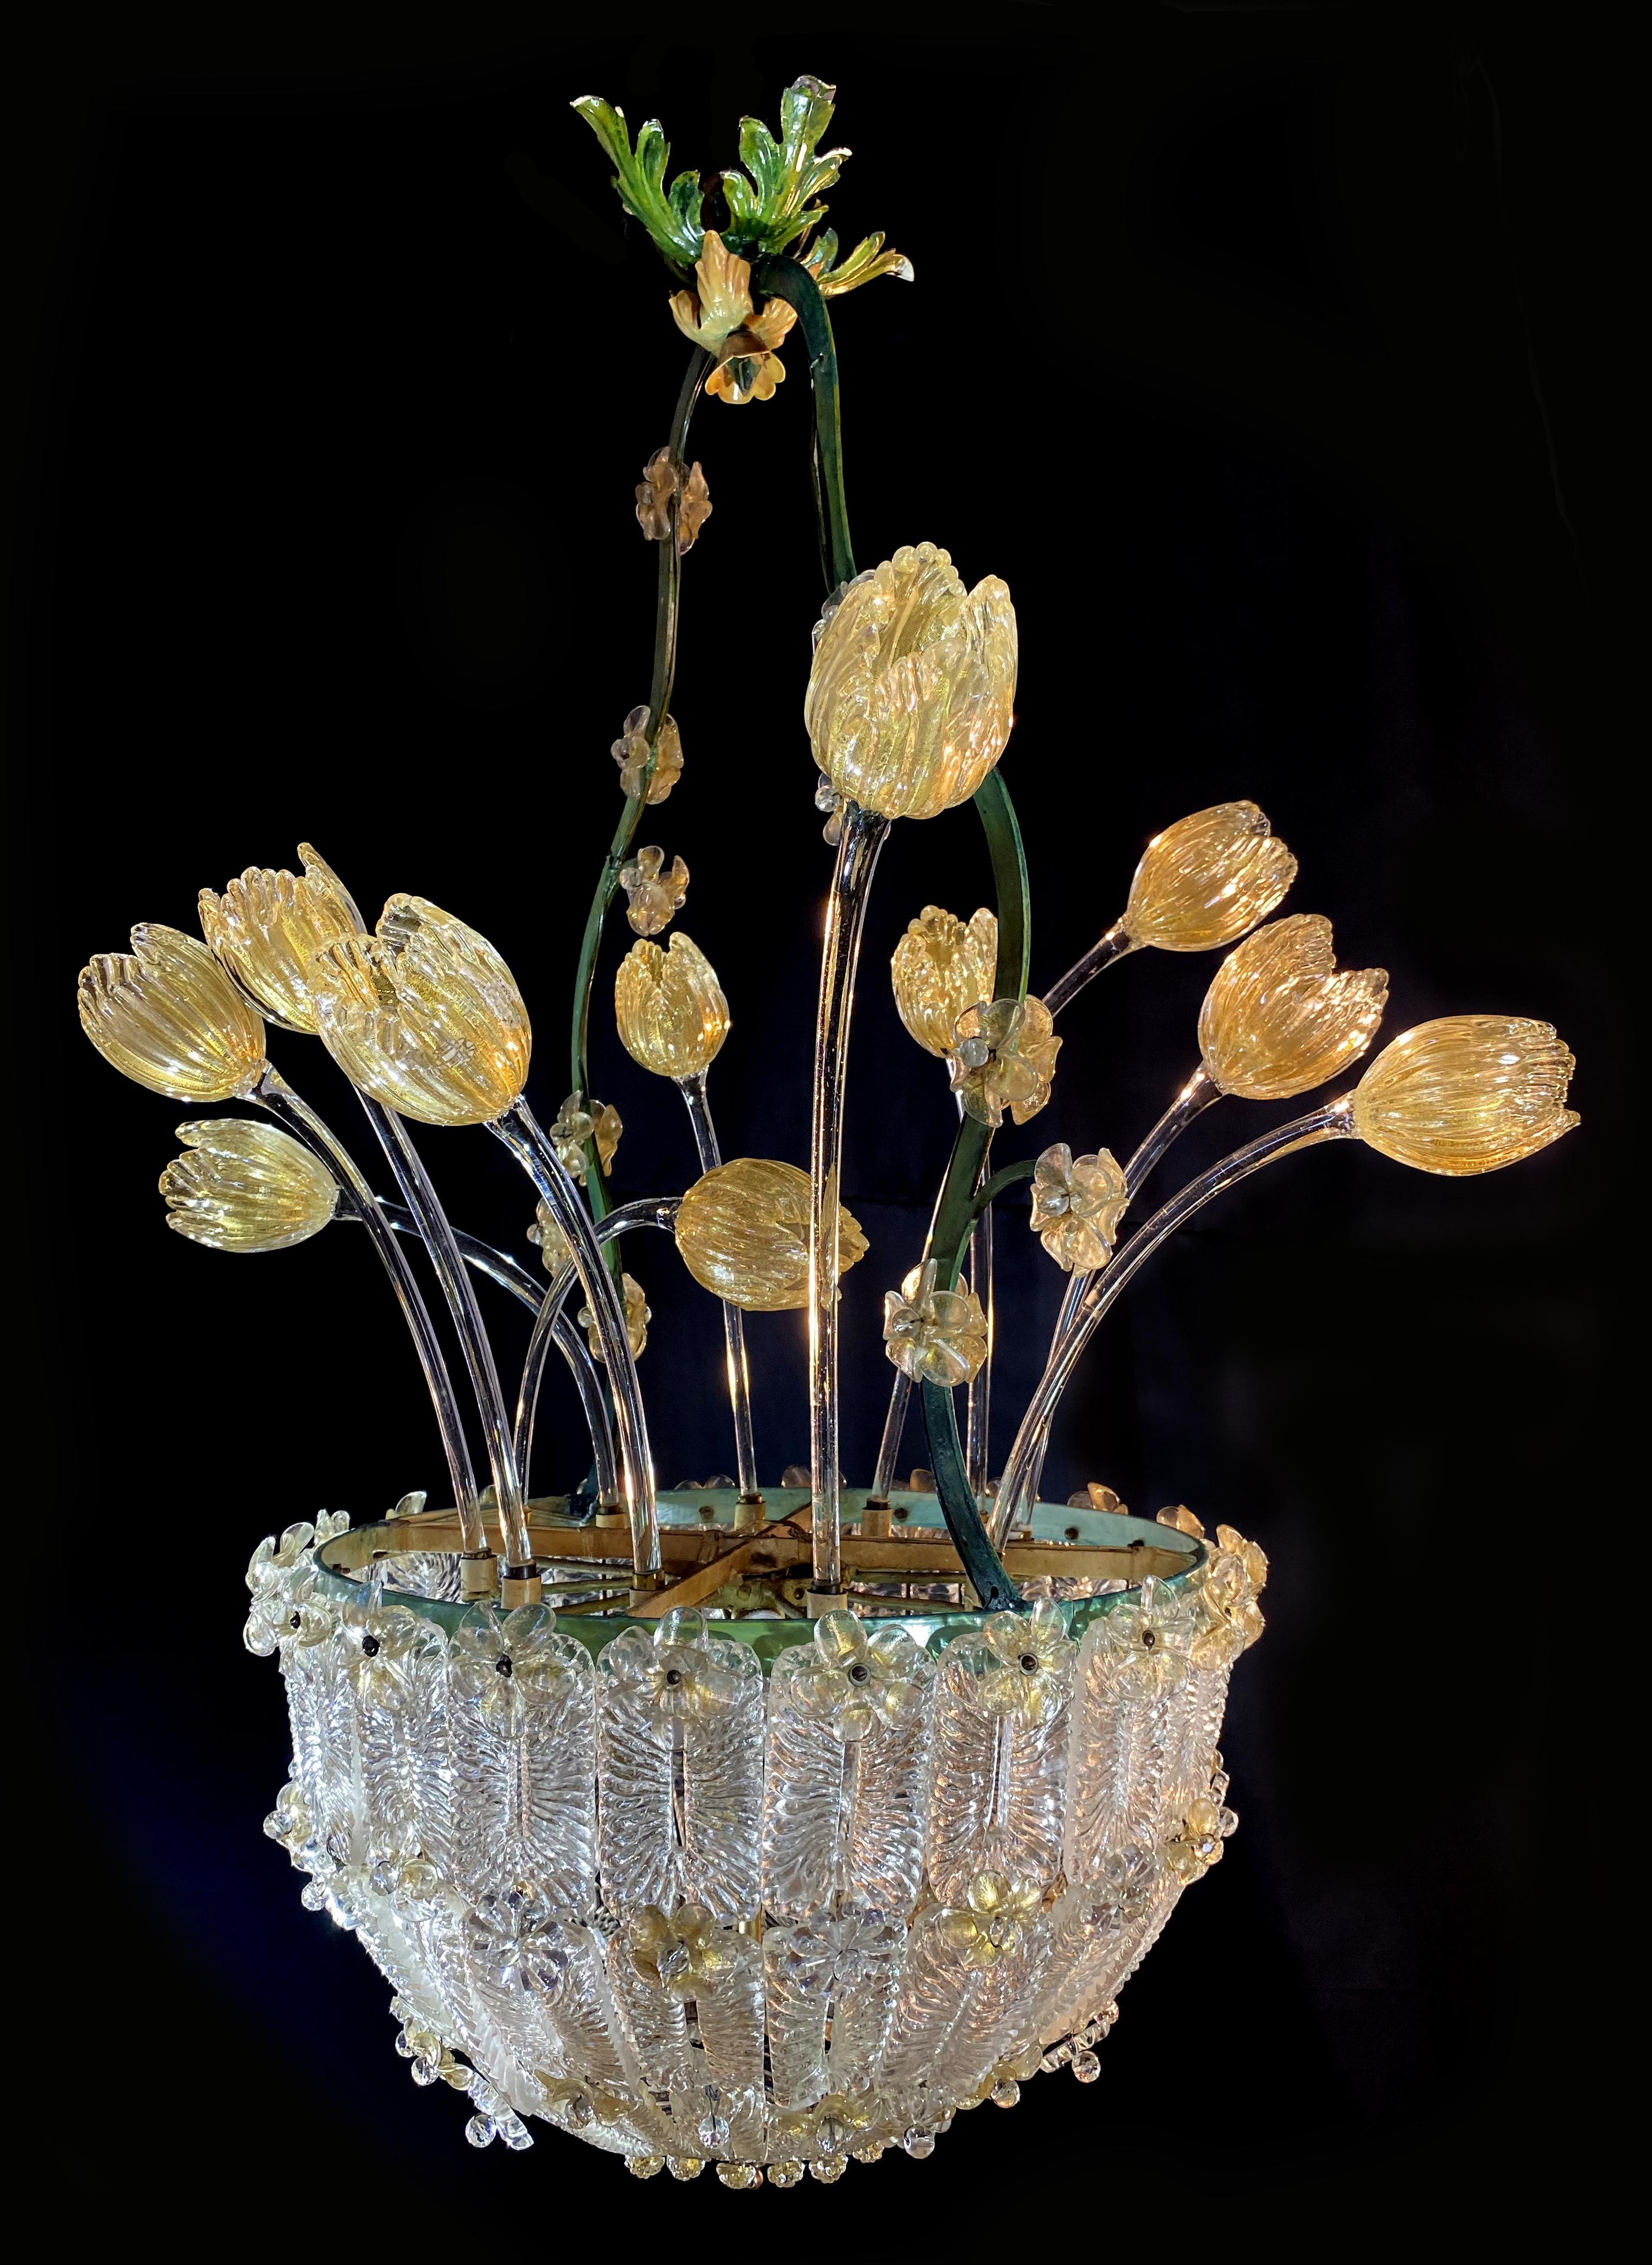 Amazing Glass Flower Chandelier with Gold Inclusions, Murano, 1950s For Sale 7